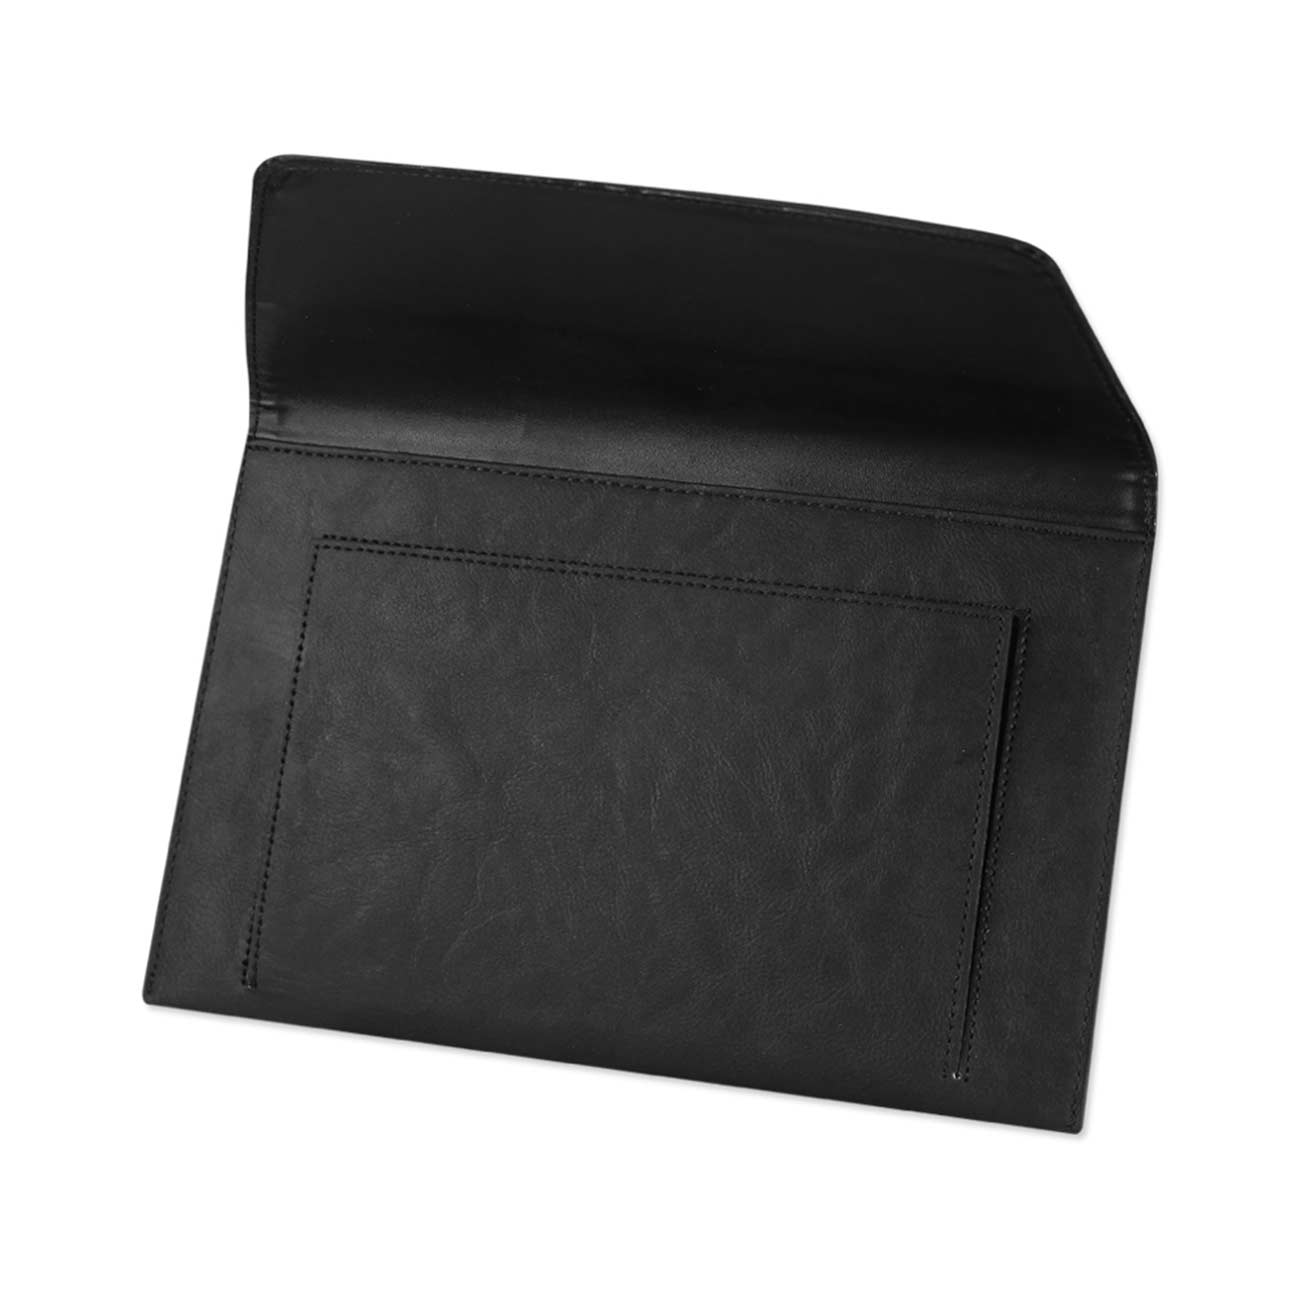 REIKO PREMIUM LEATHER CASE POUCH FOR 8.9INCHES IPADS AND TABLETS In BLACK